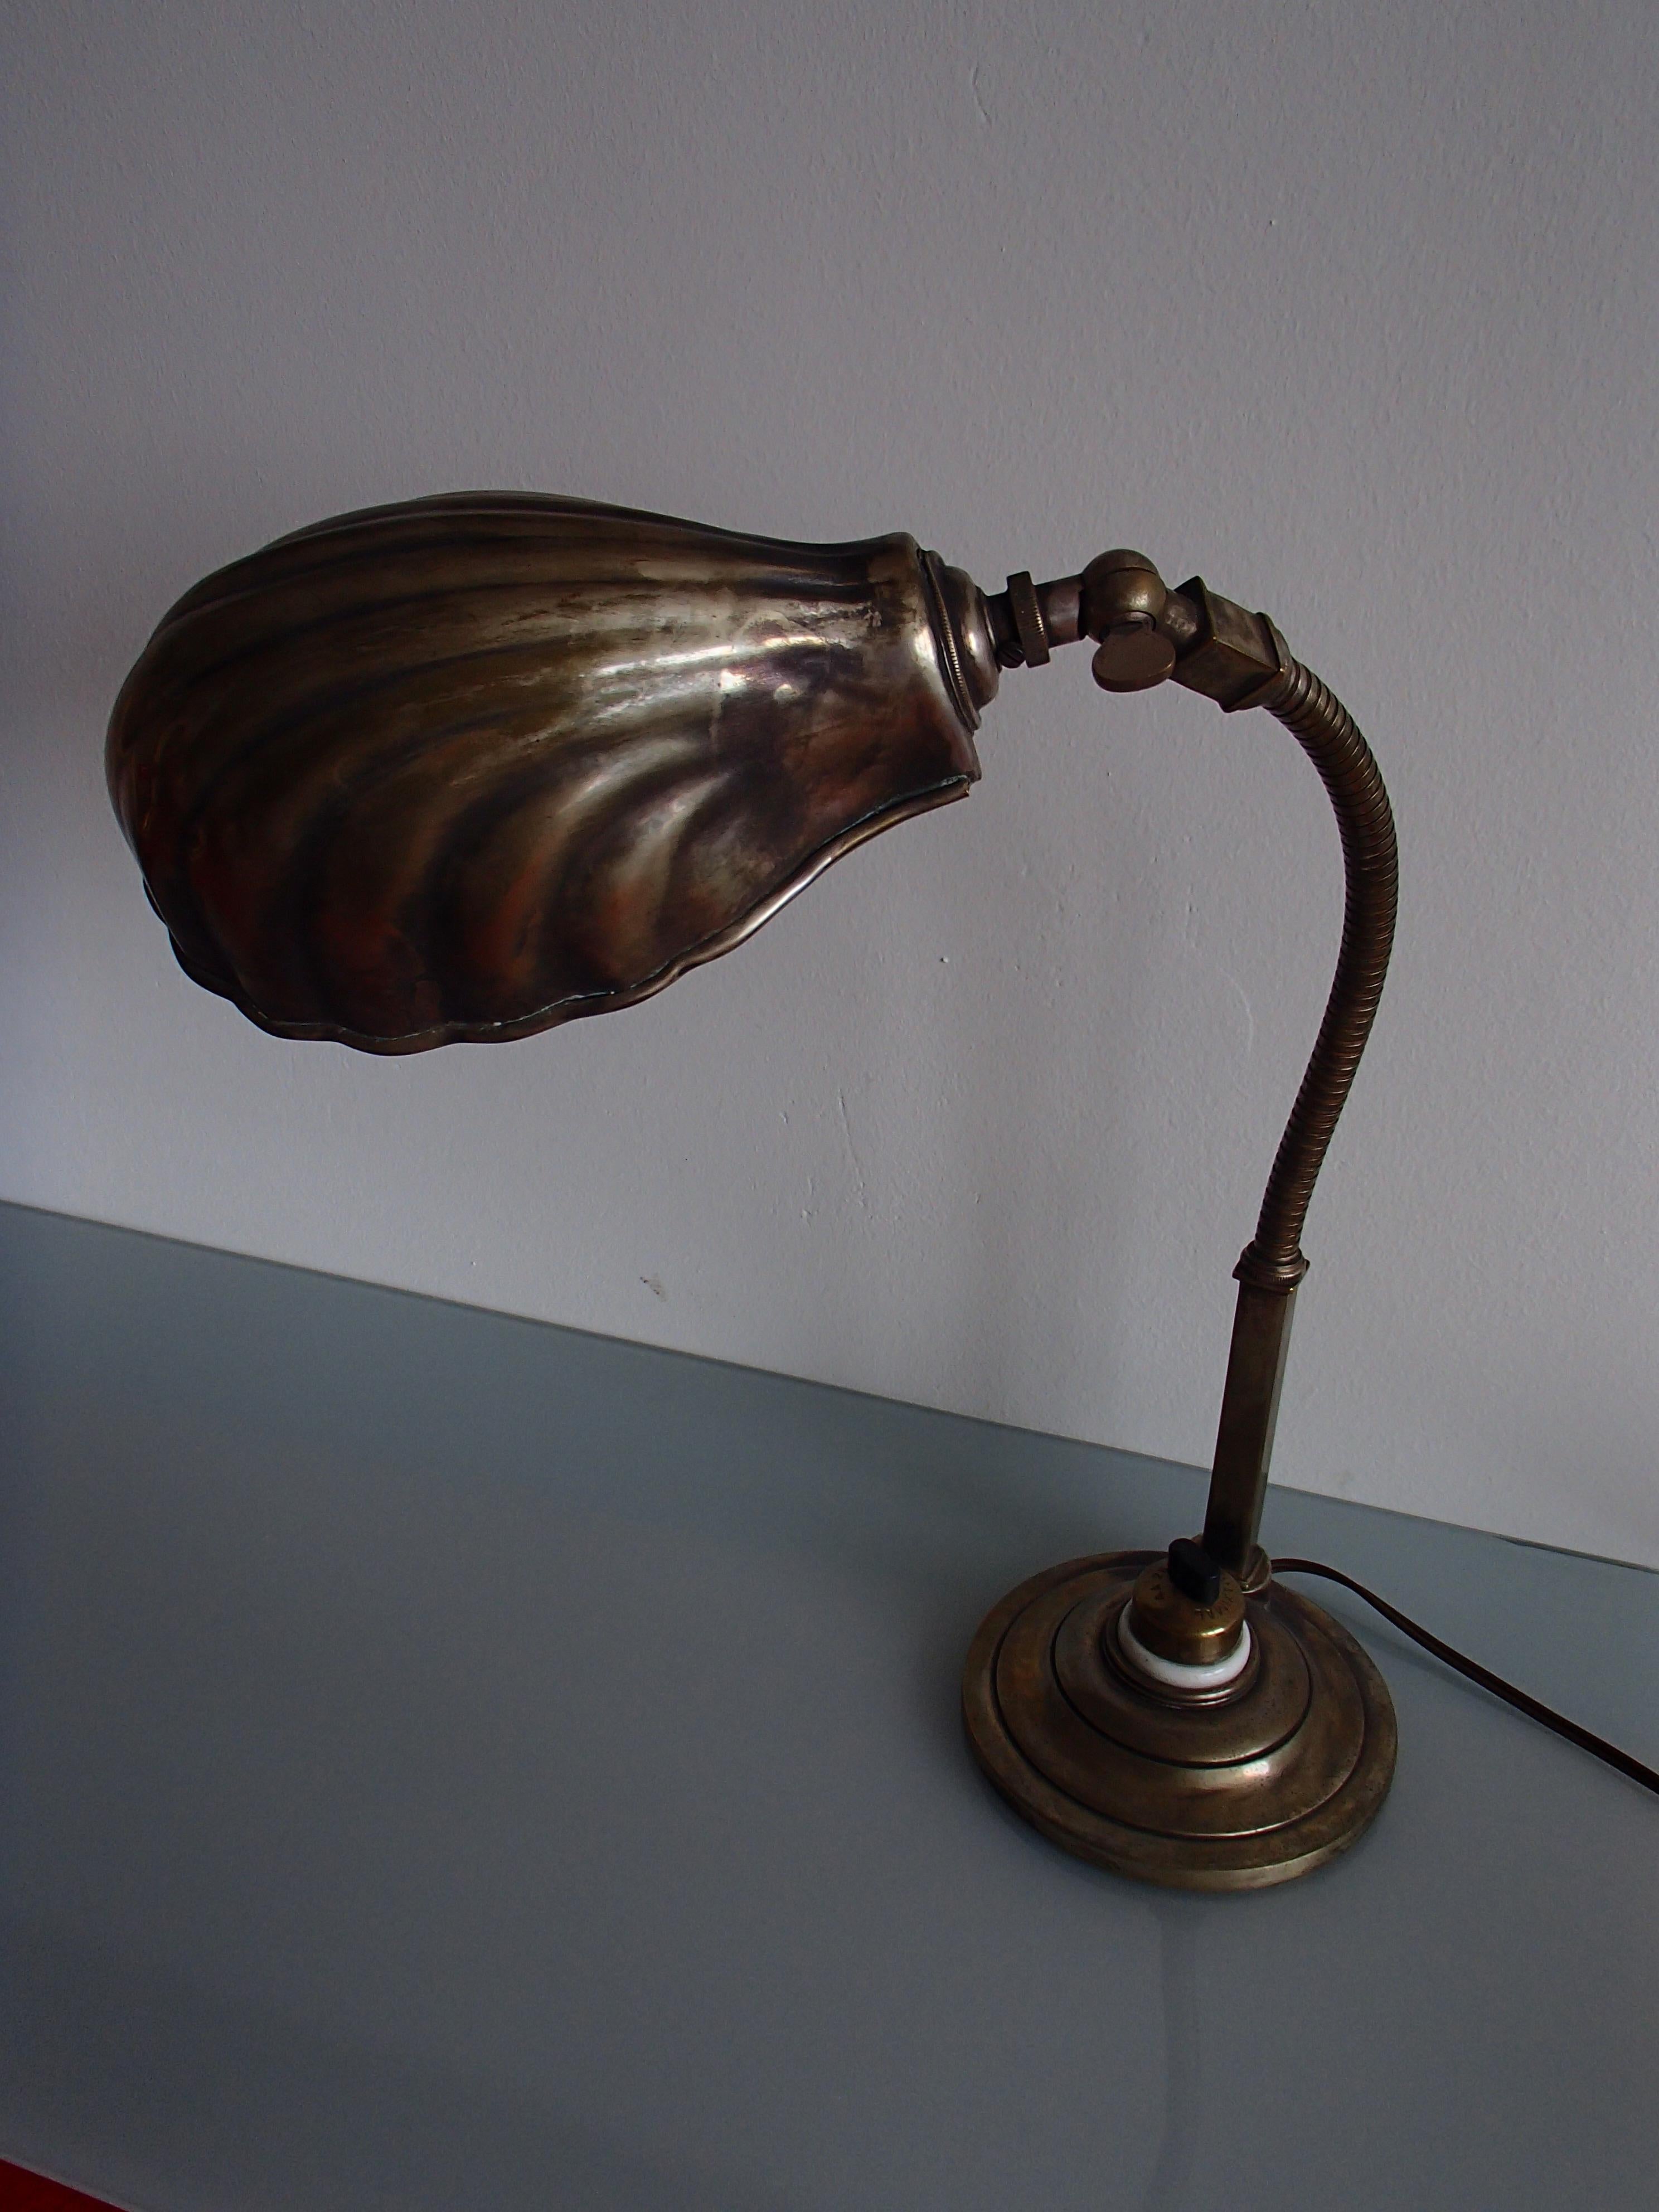 19th century shell table lamp with flexible neck.